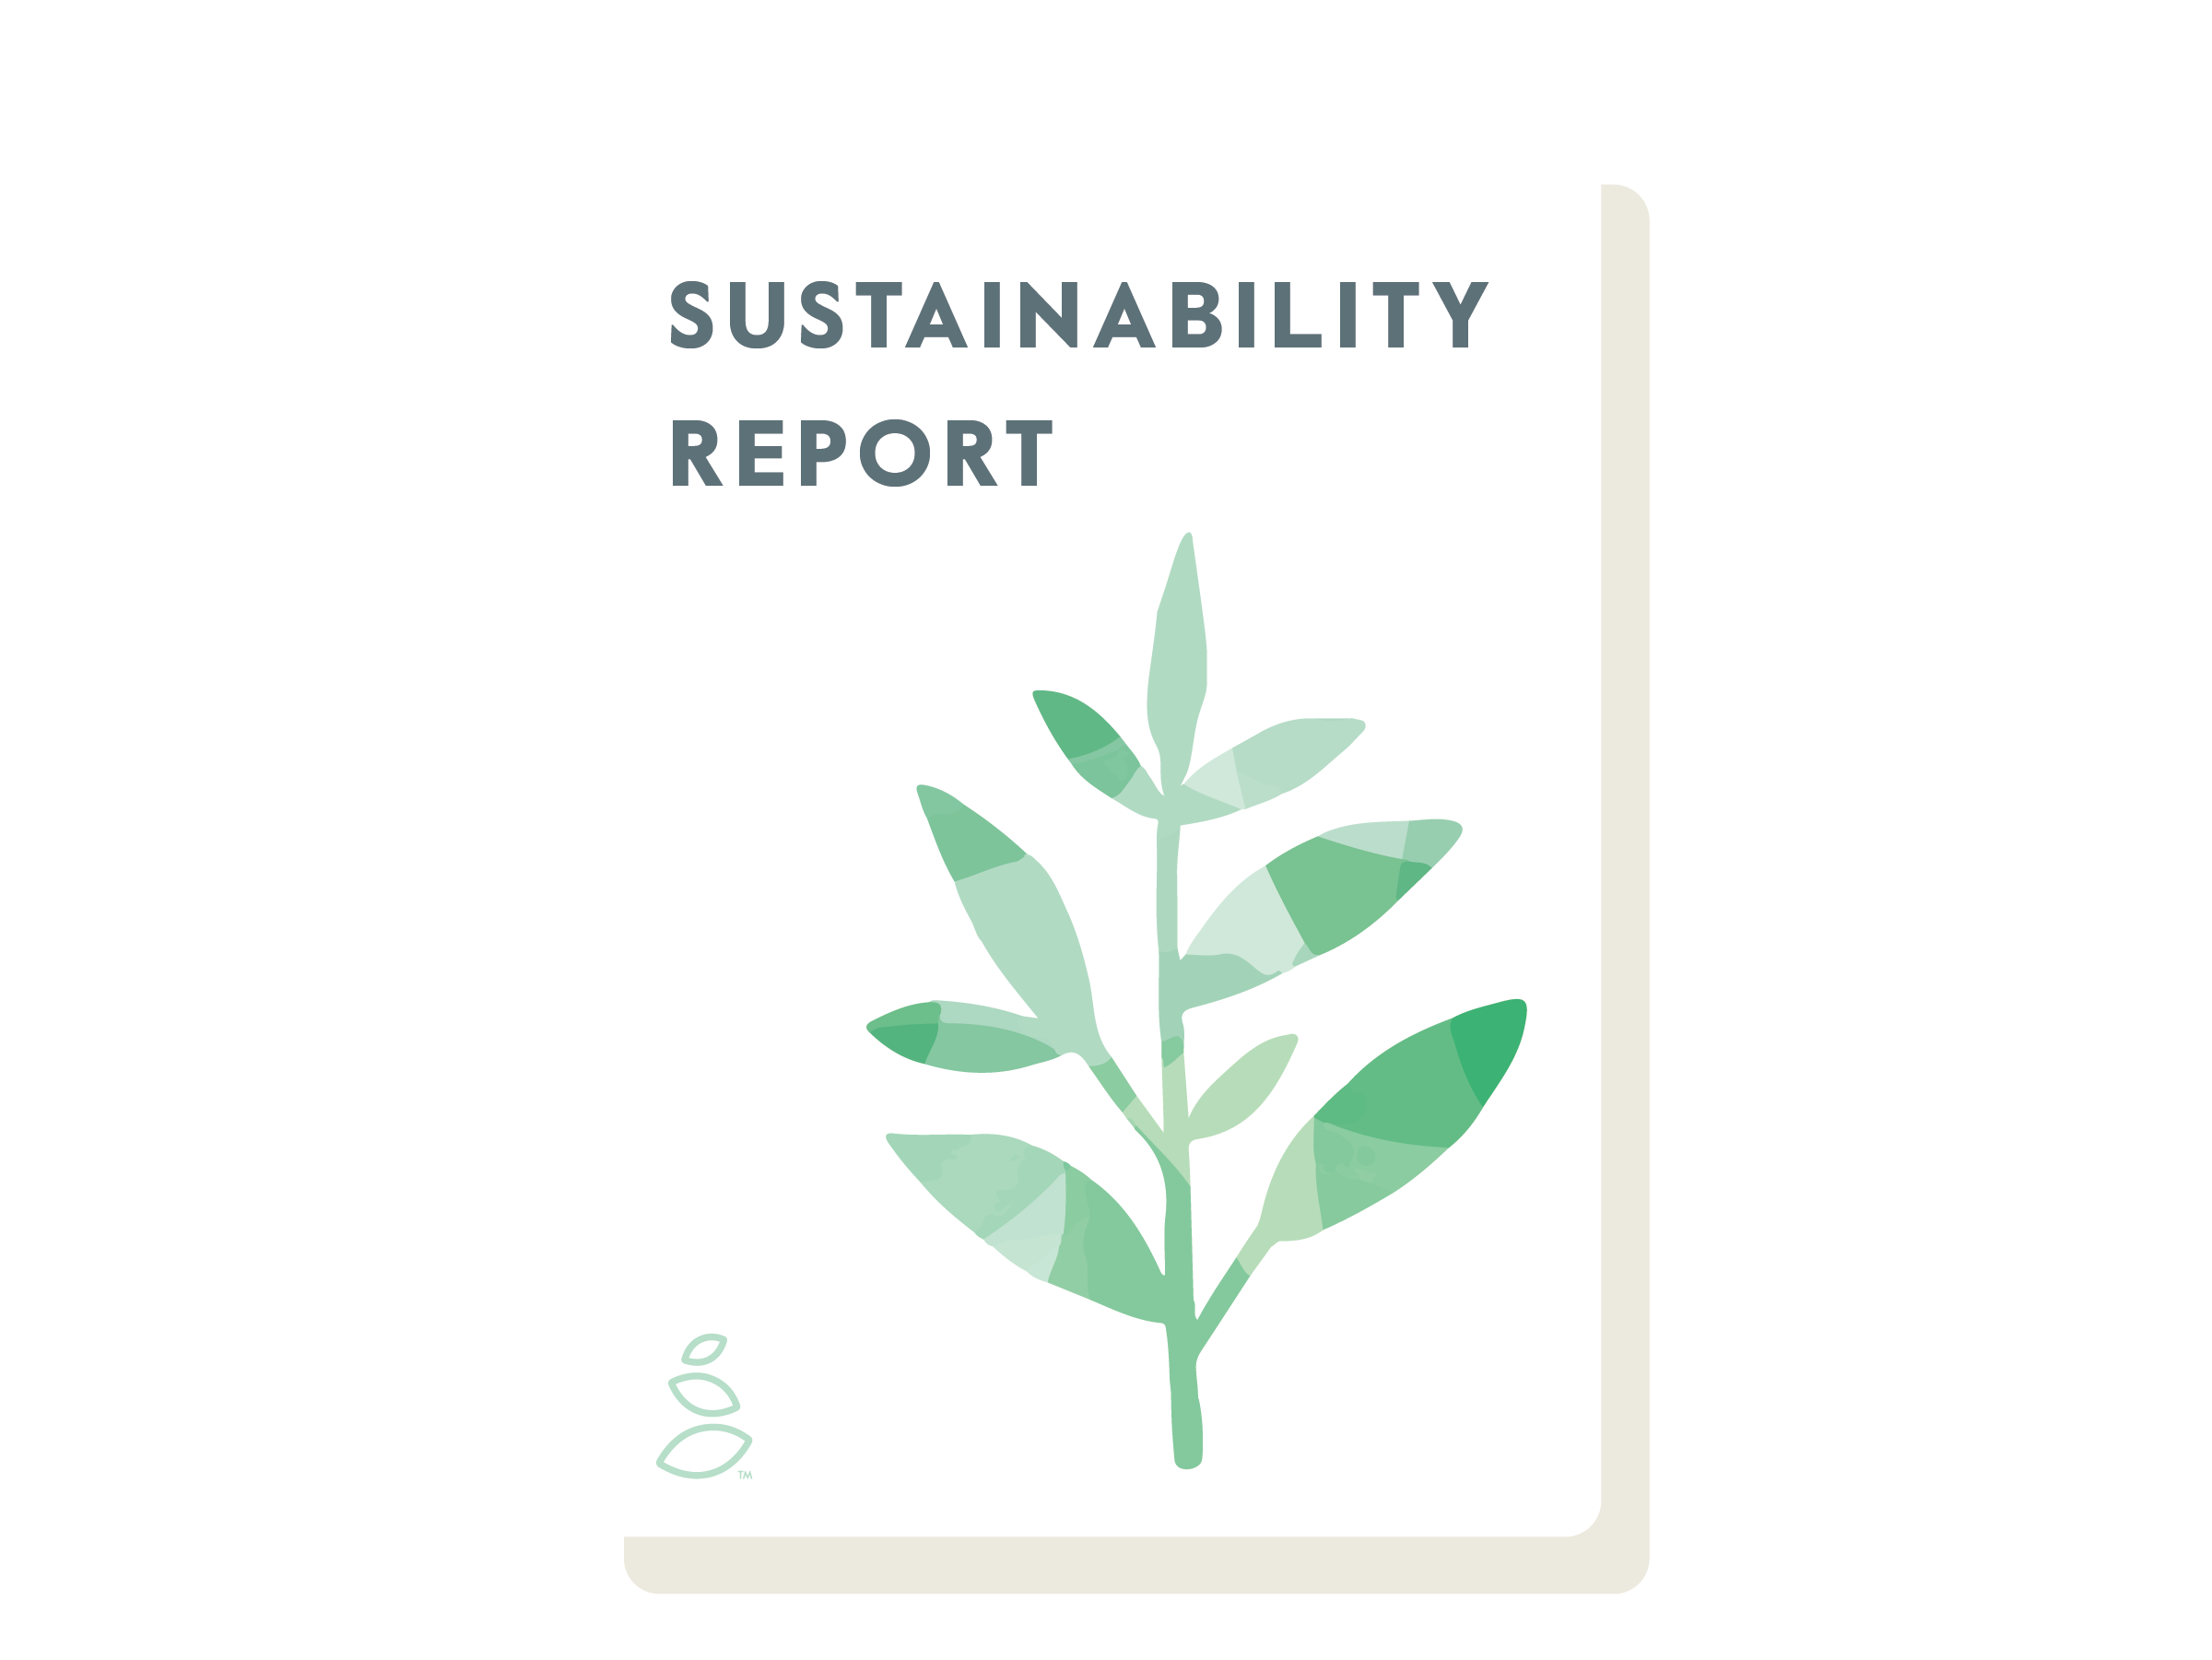 Illustration of a tree branch on a card that says "sustainability report"